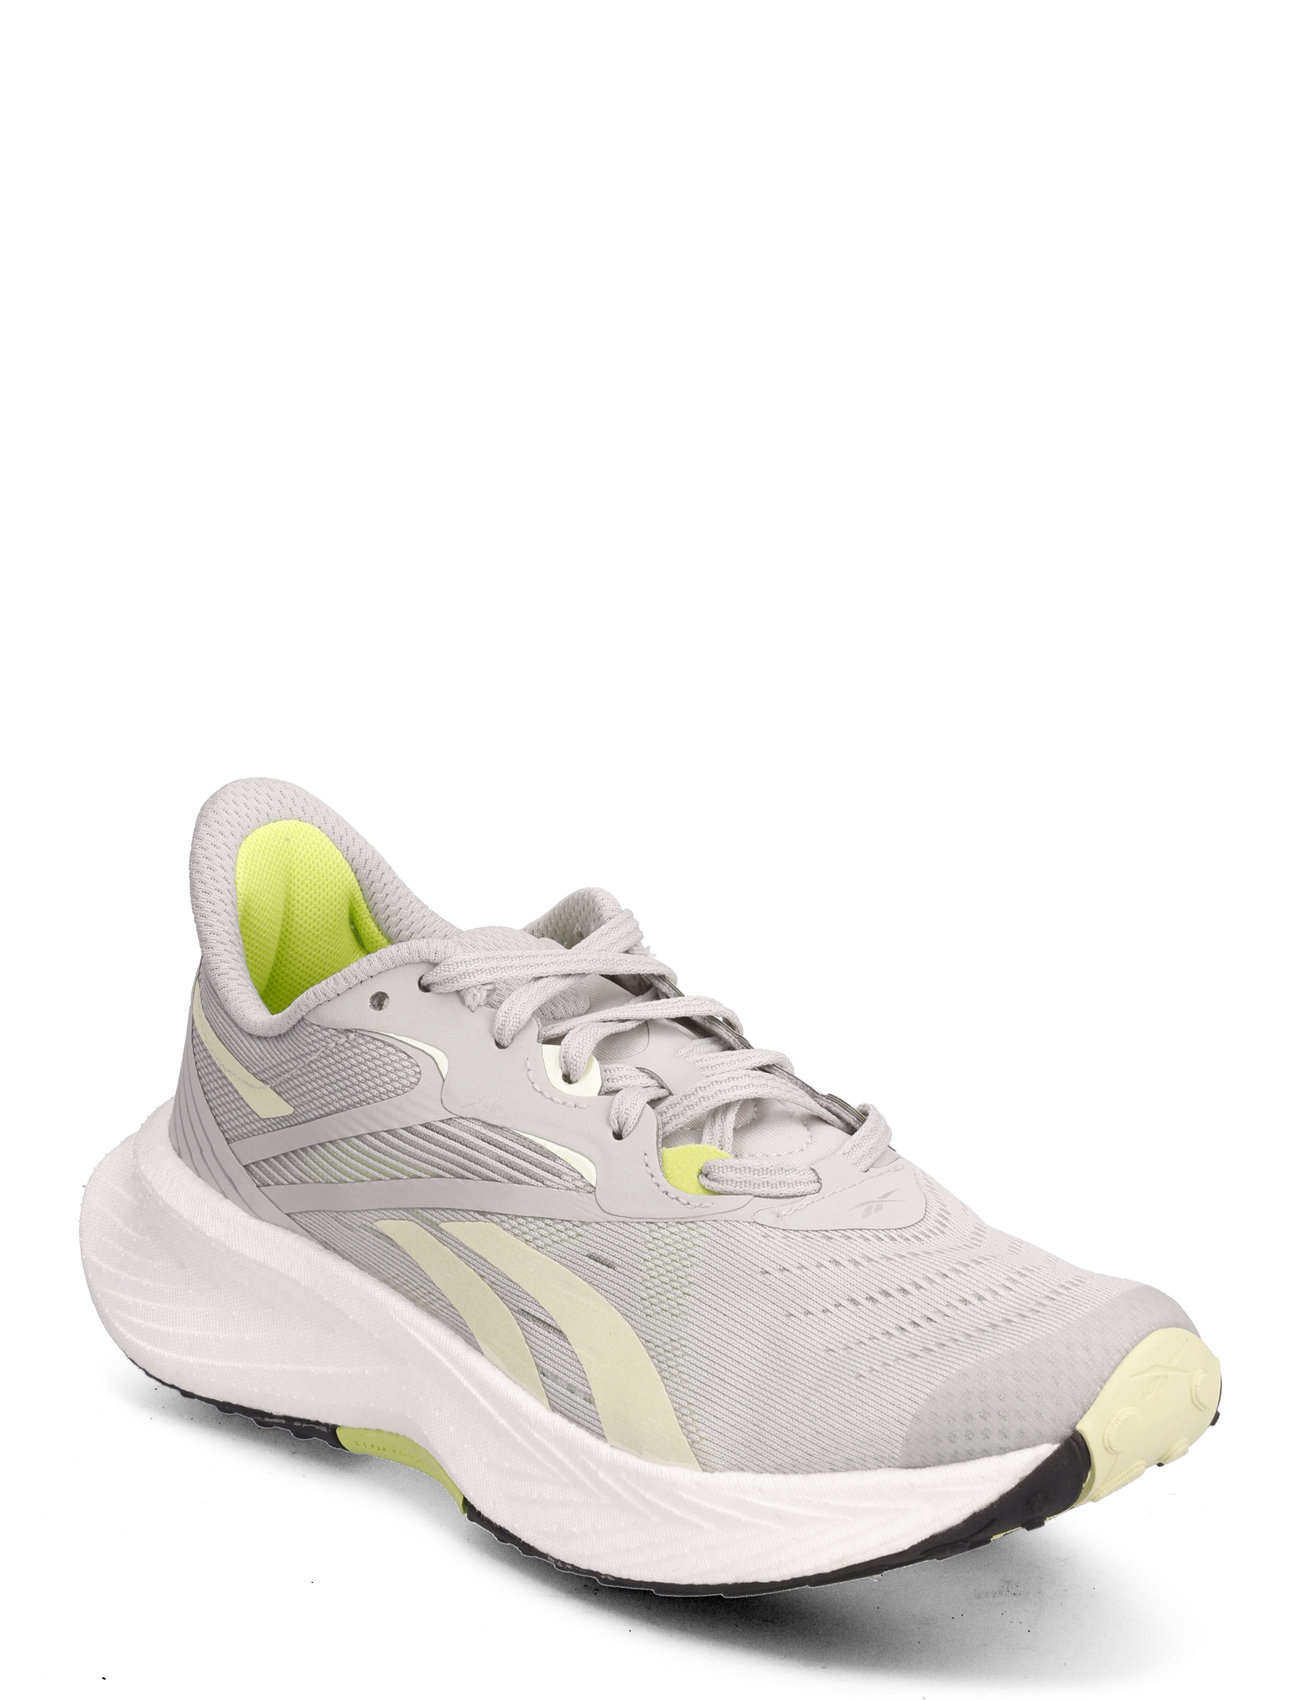 Floatride Energy 5 Shoes Sport Shoes Running Shoes Grey Reebok Performance